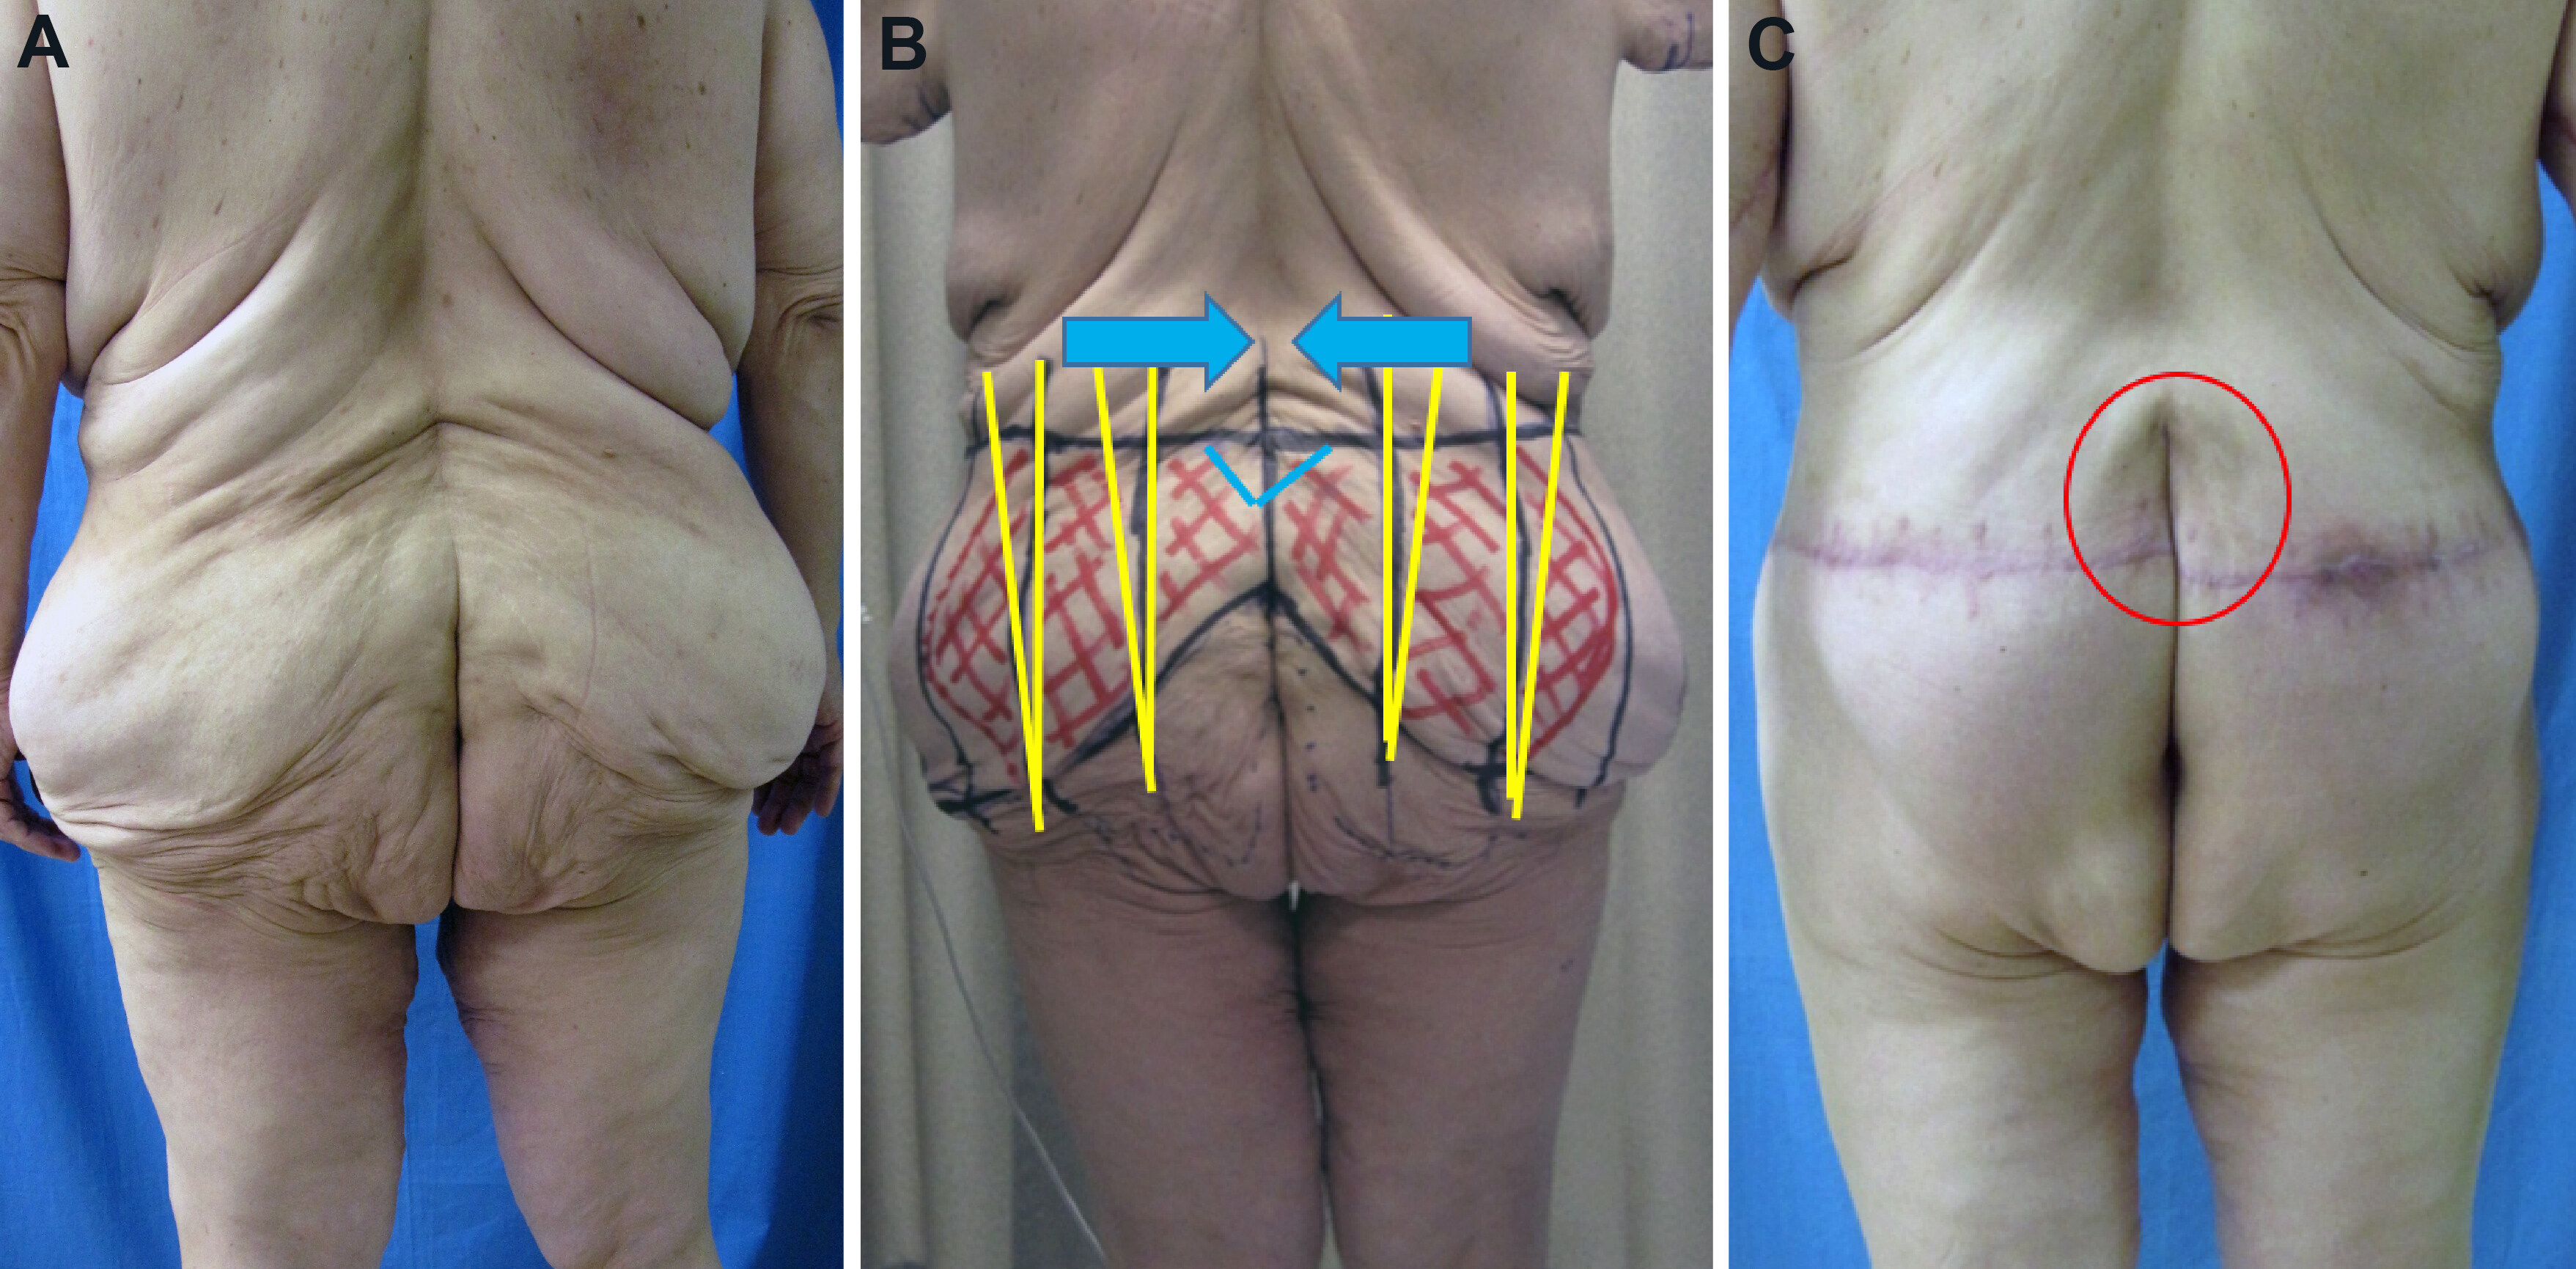 Surgical circumferential contouring: lower body, upper body, and in-between